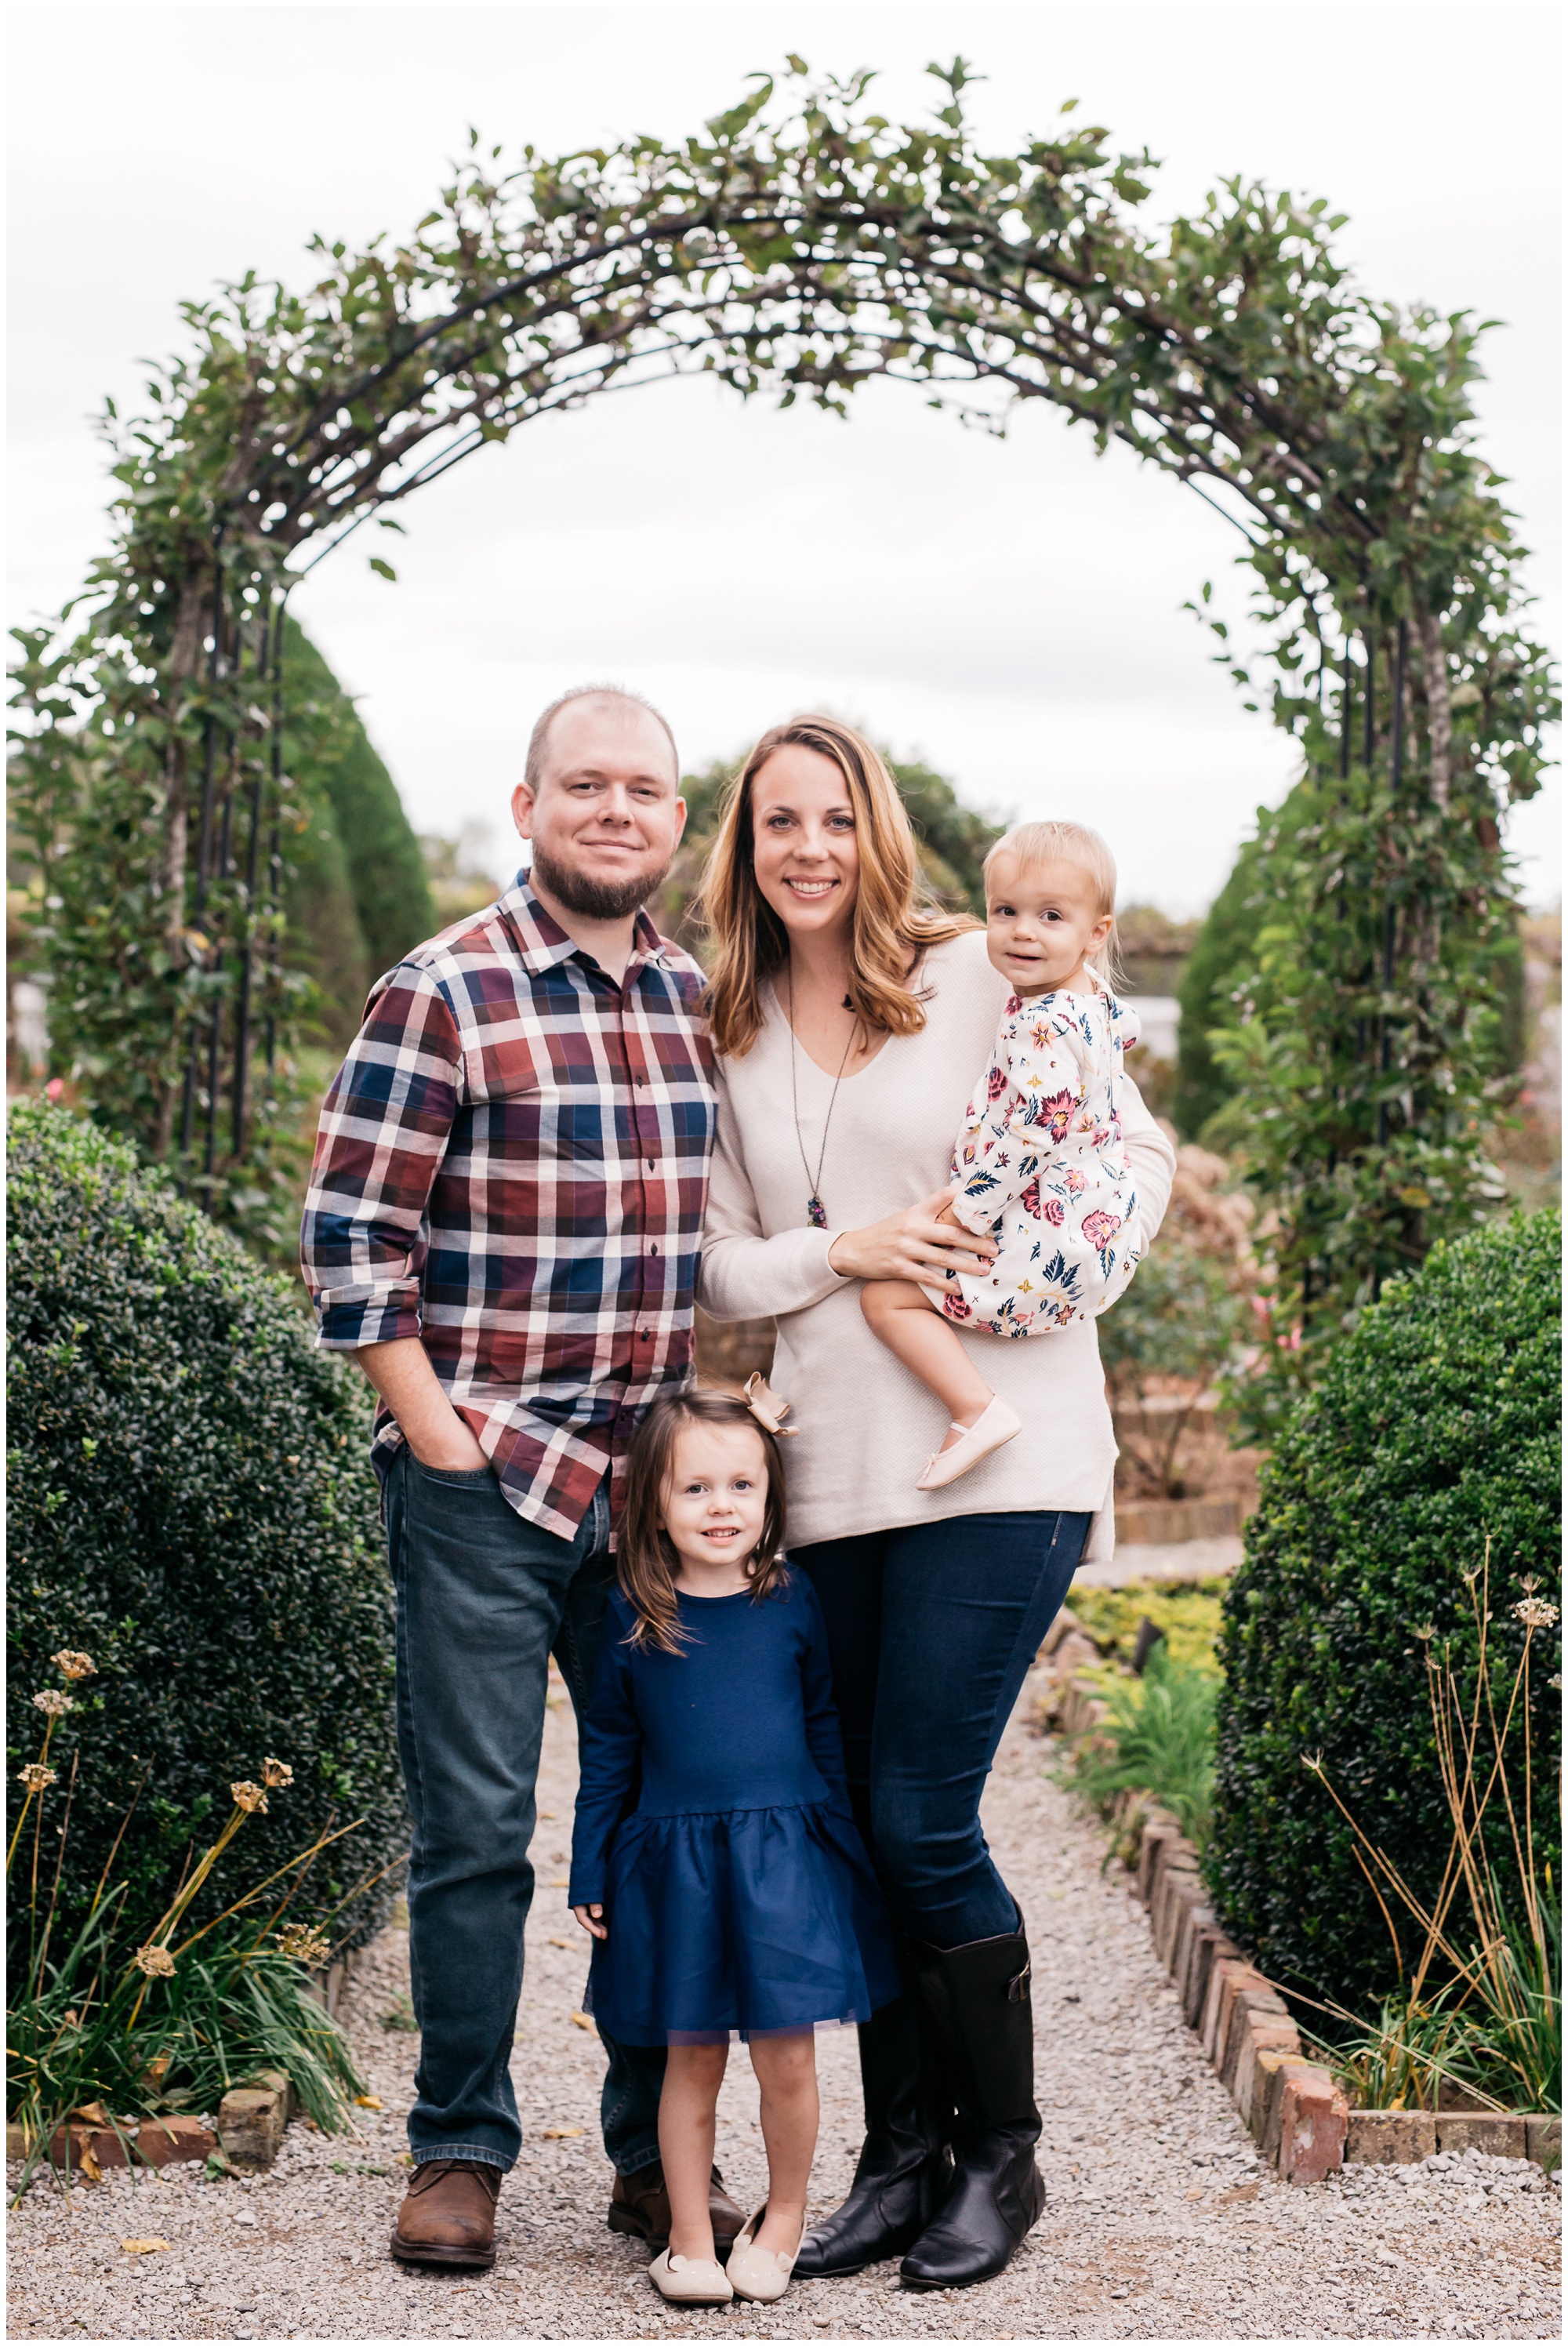 Nashville Fall Mini Sessions at Carnton Plantation in Franklin, TN by family photographer Meredith Teasley